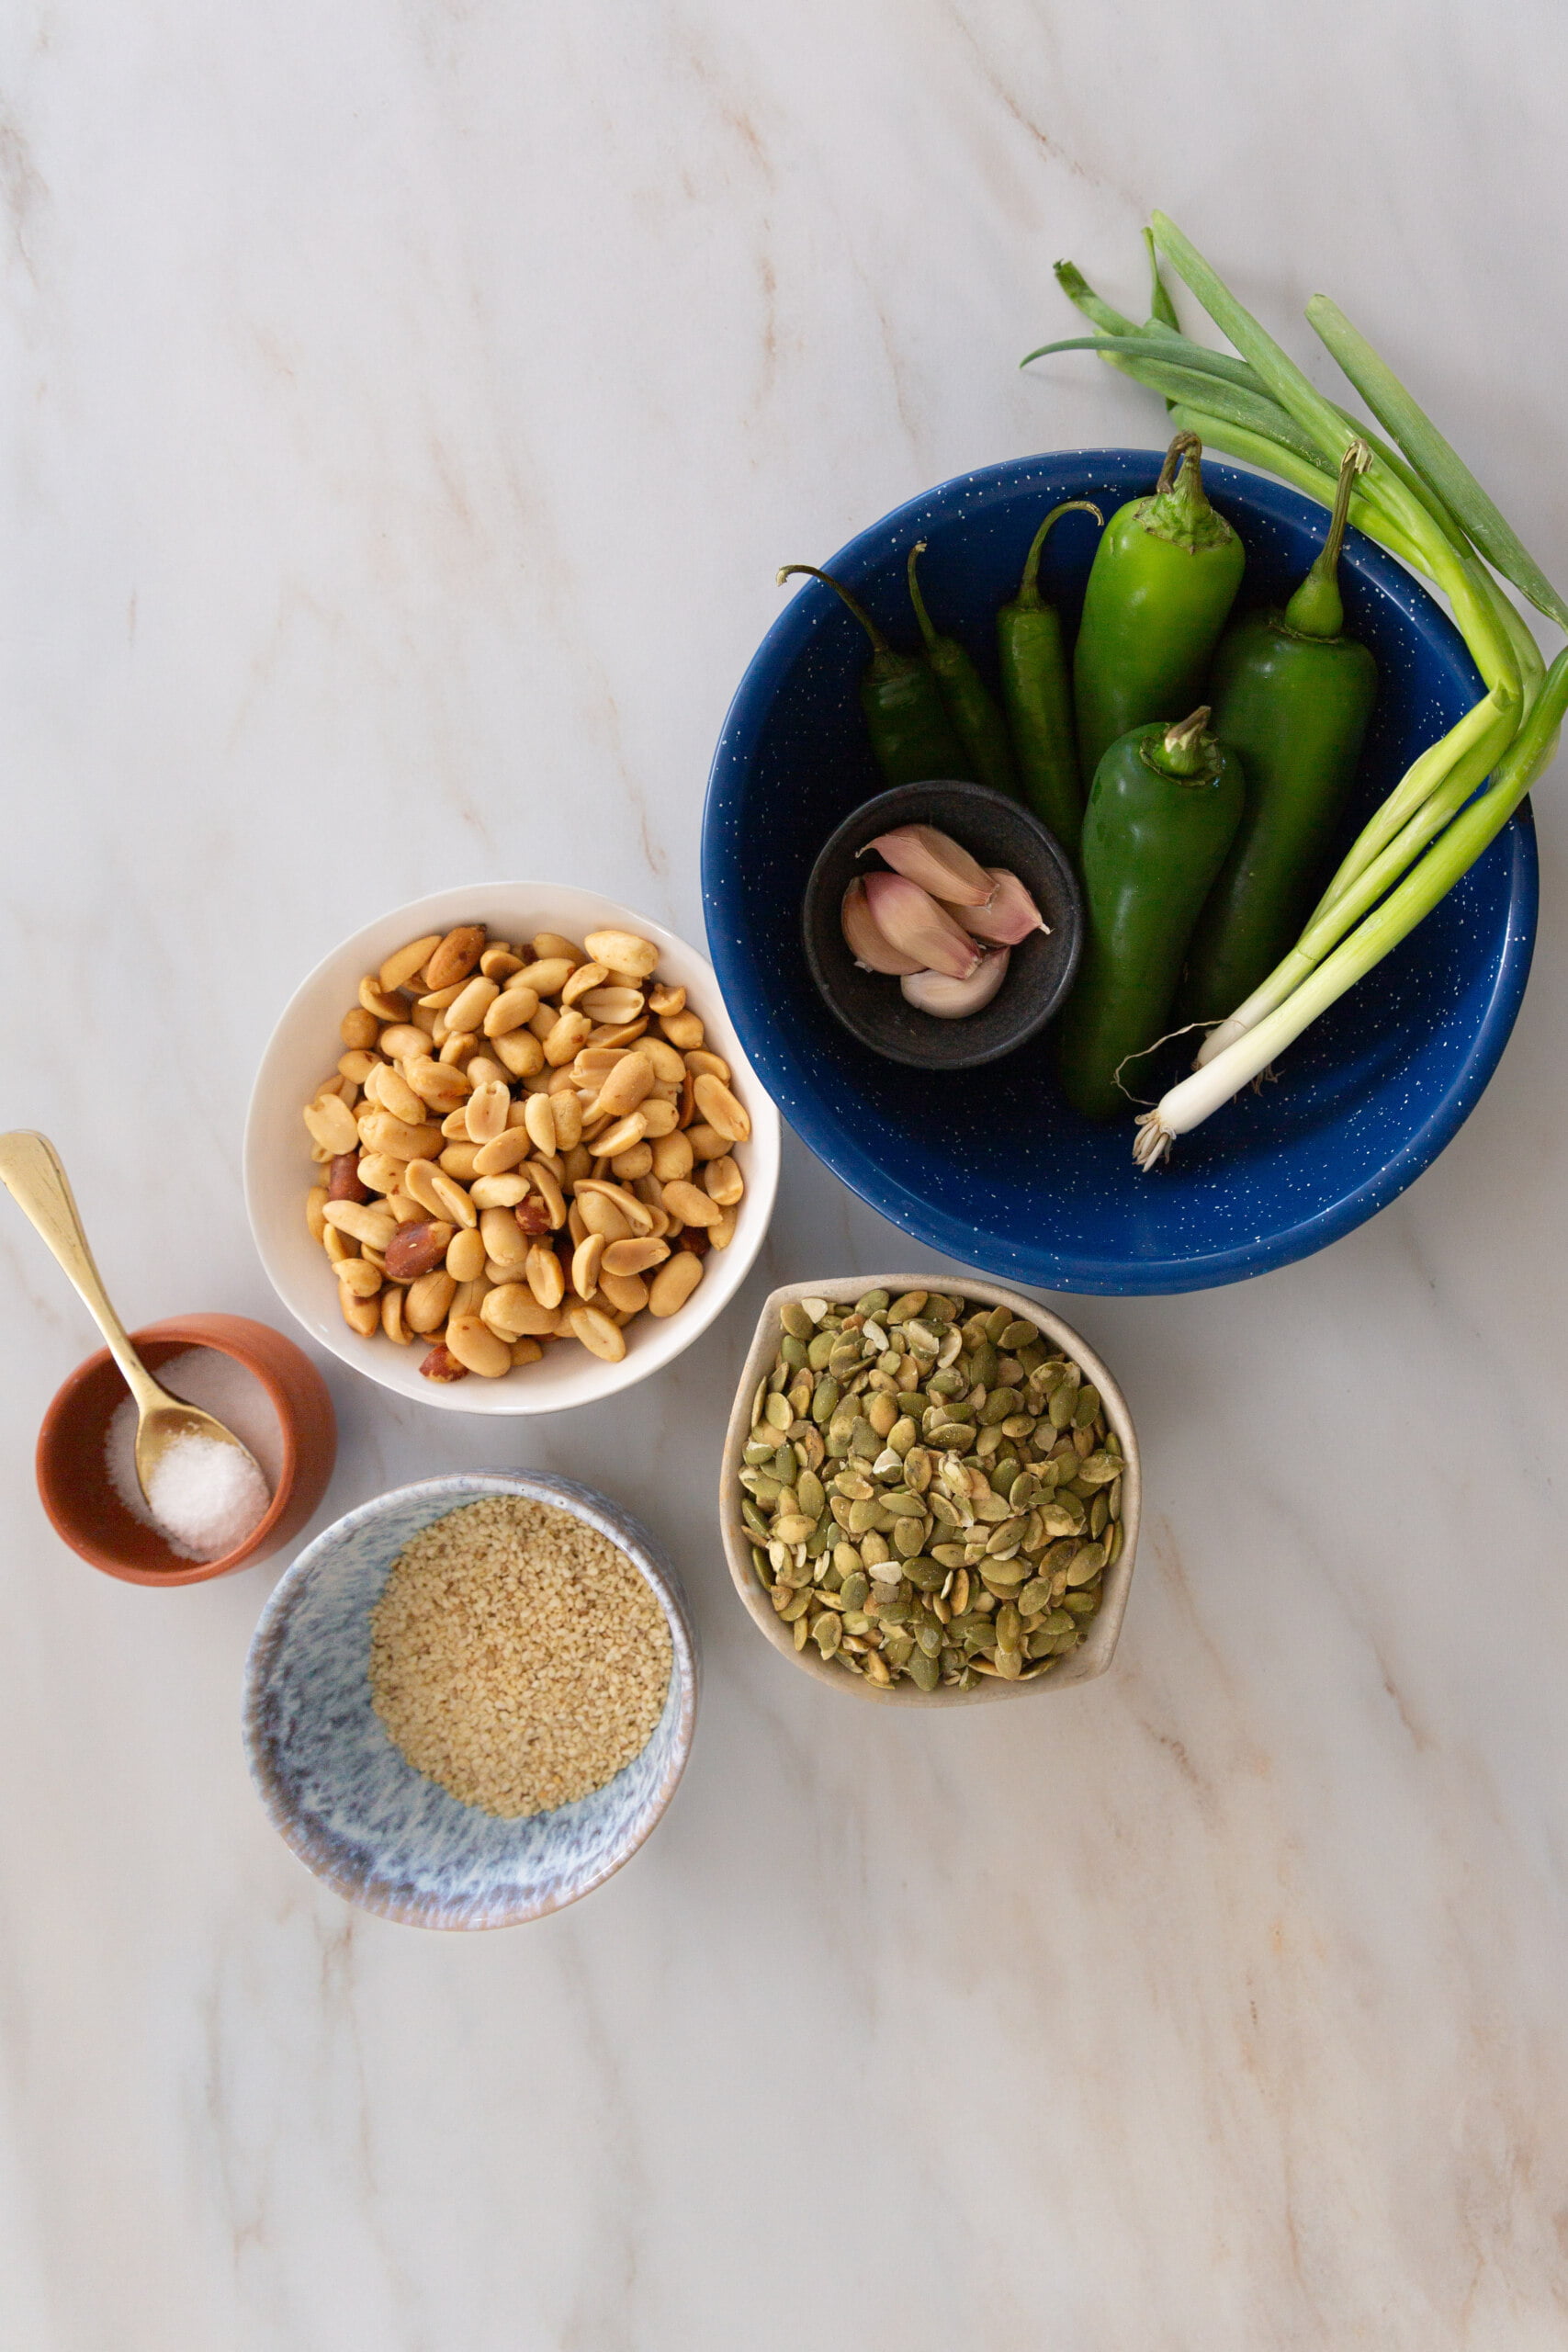 A bowl of peanuts, green onions and other ingredients on a marble table.